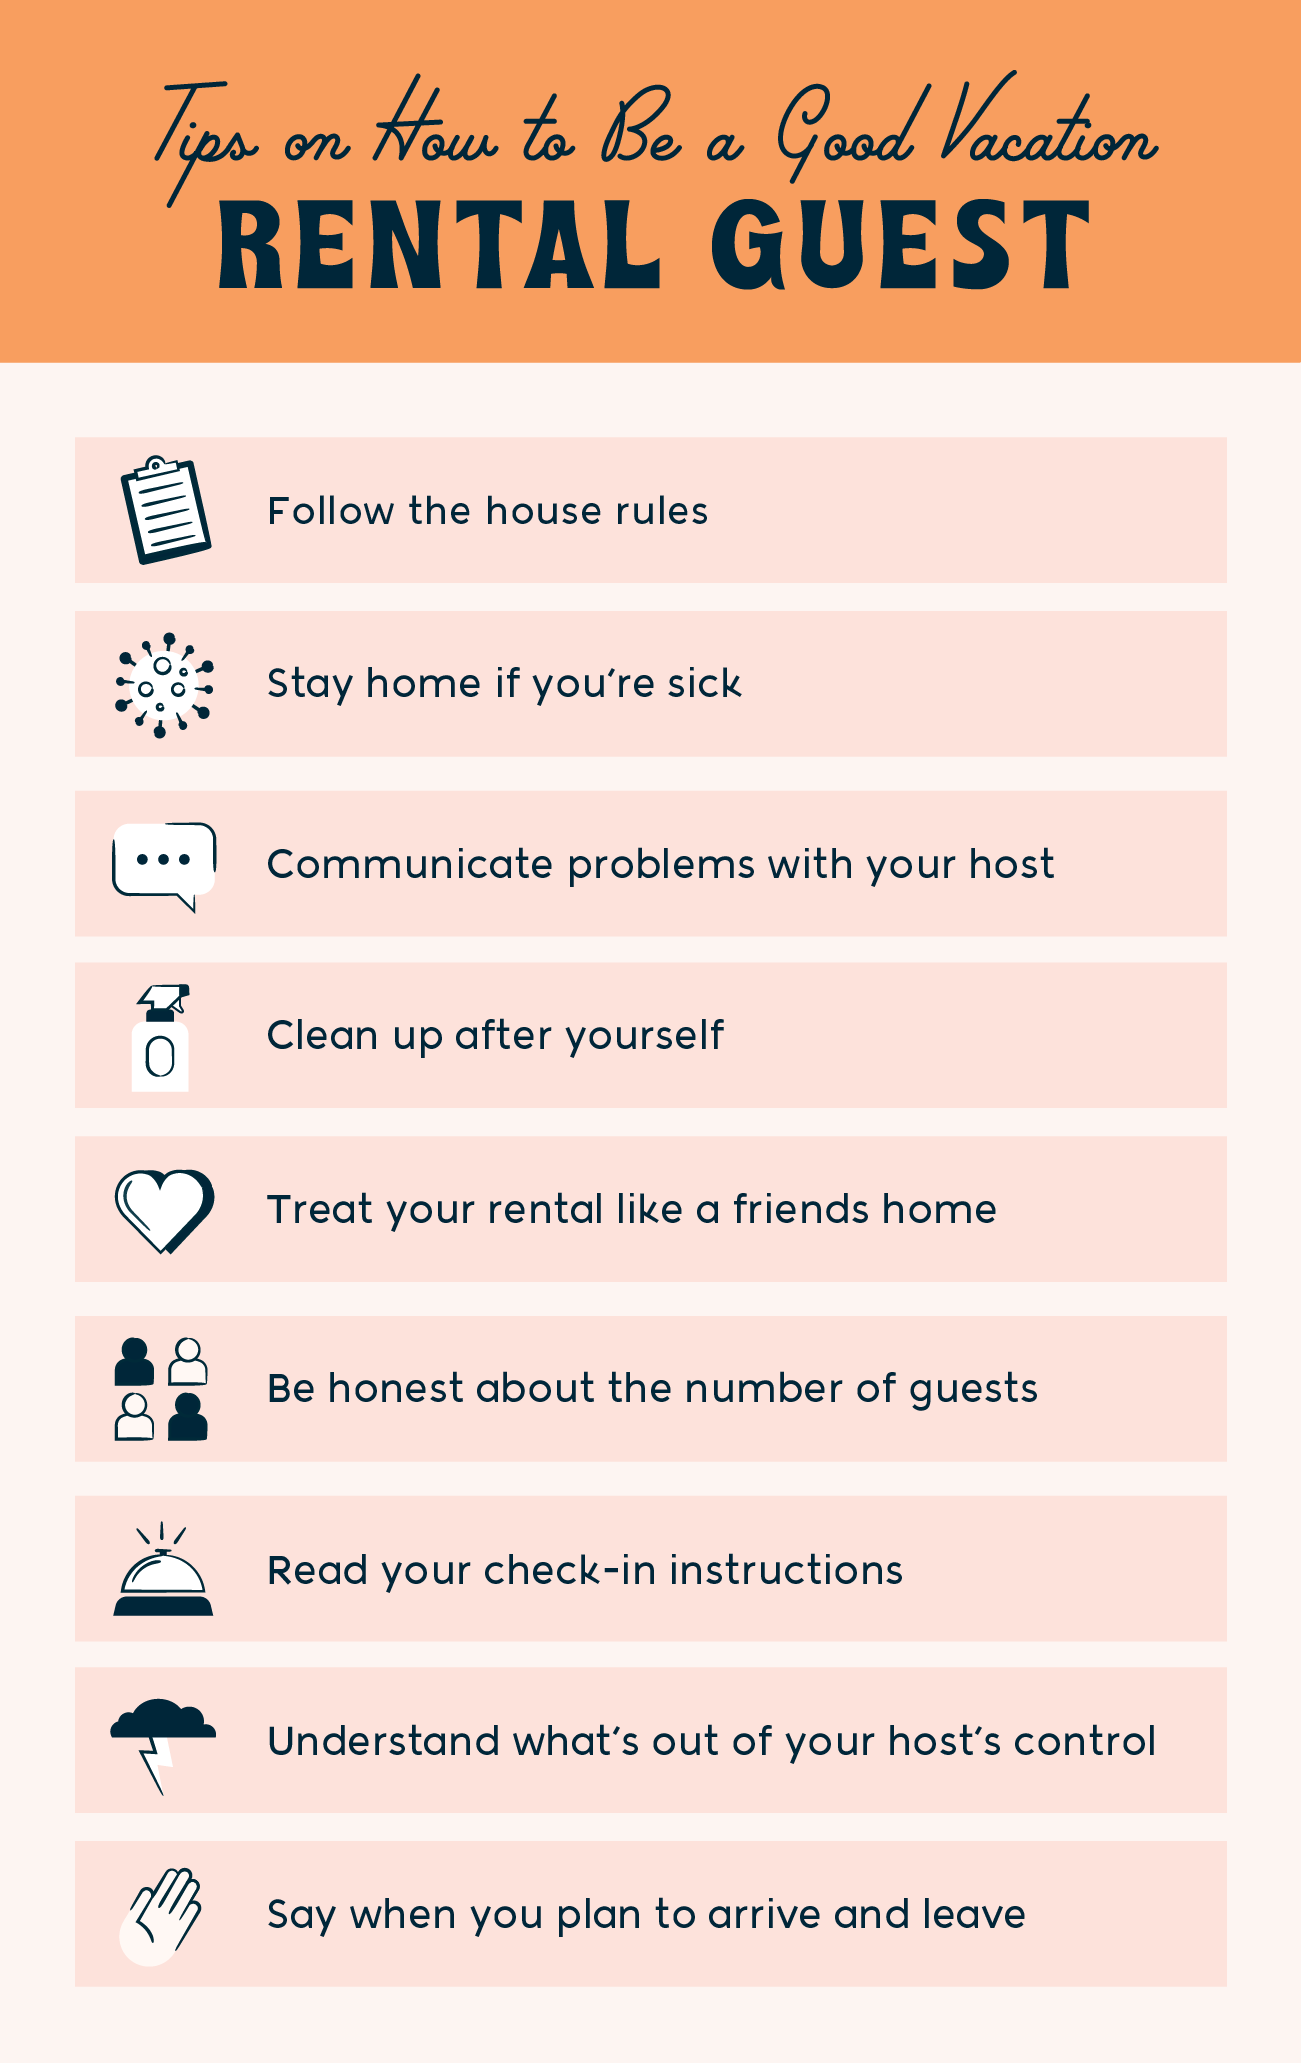 tips on how to be a good vacation rental guest